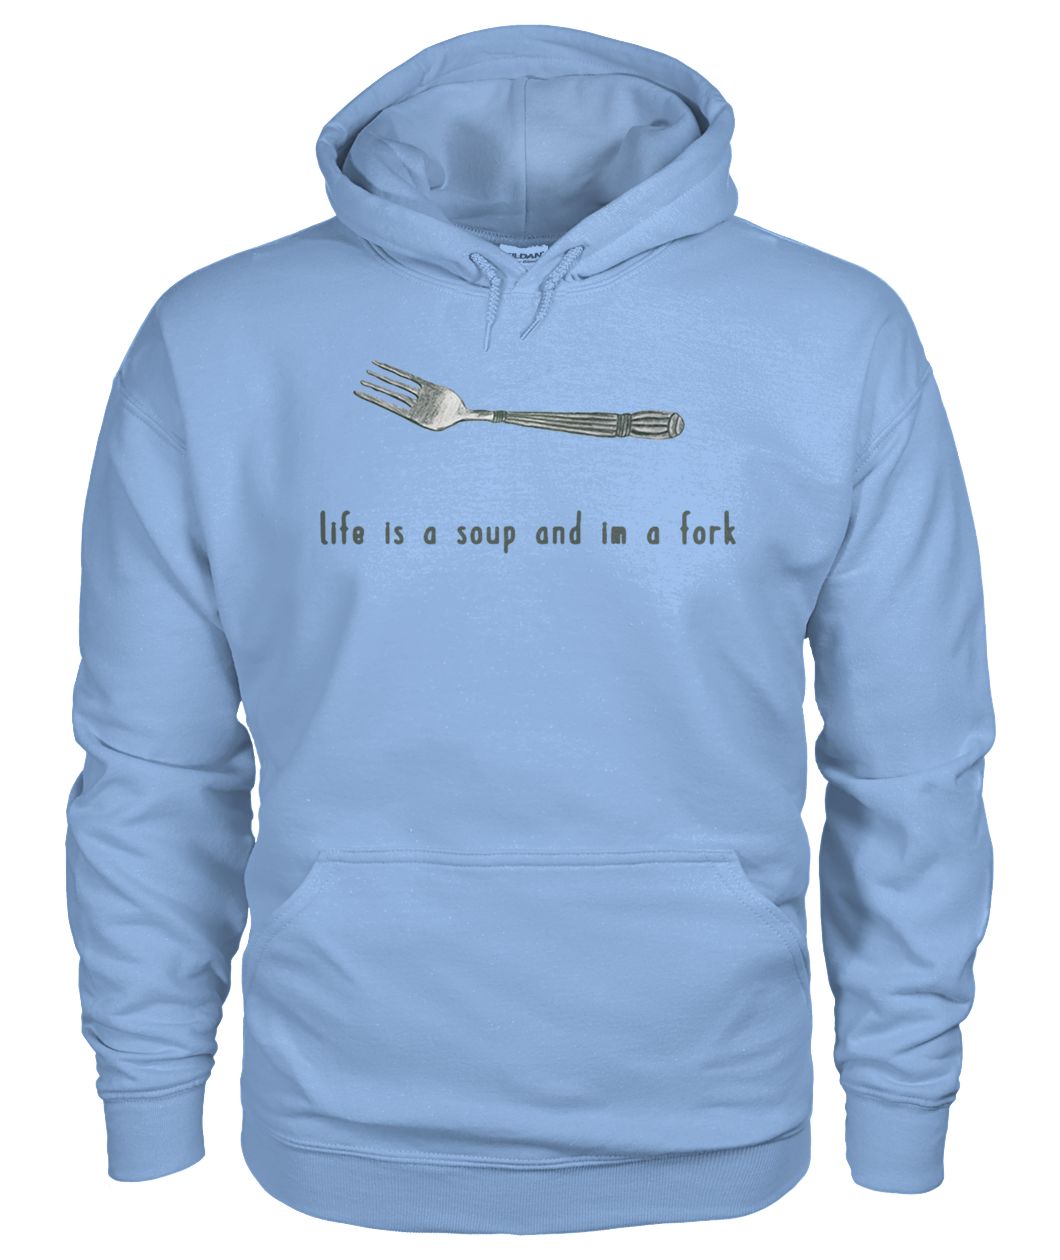 Life is a soup and I'm a fork gildan hoodie